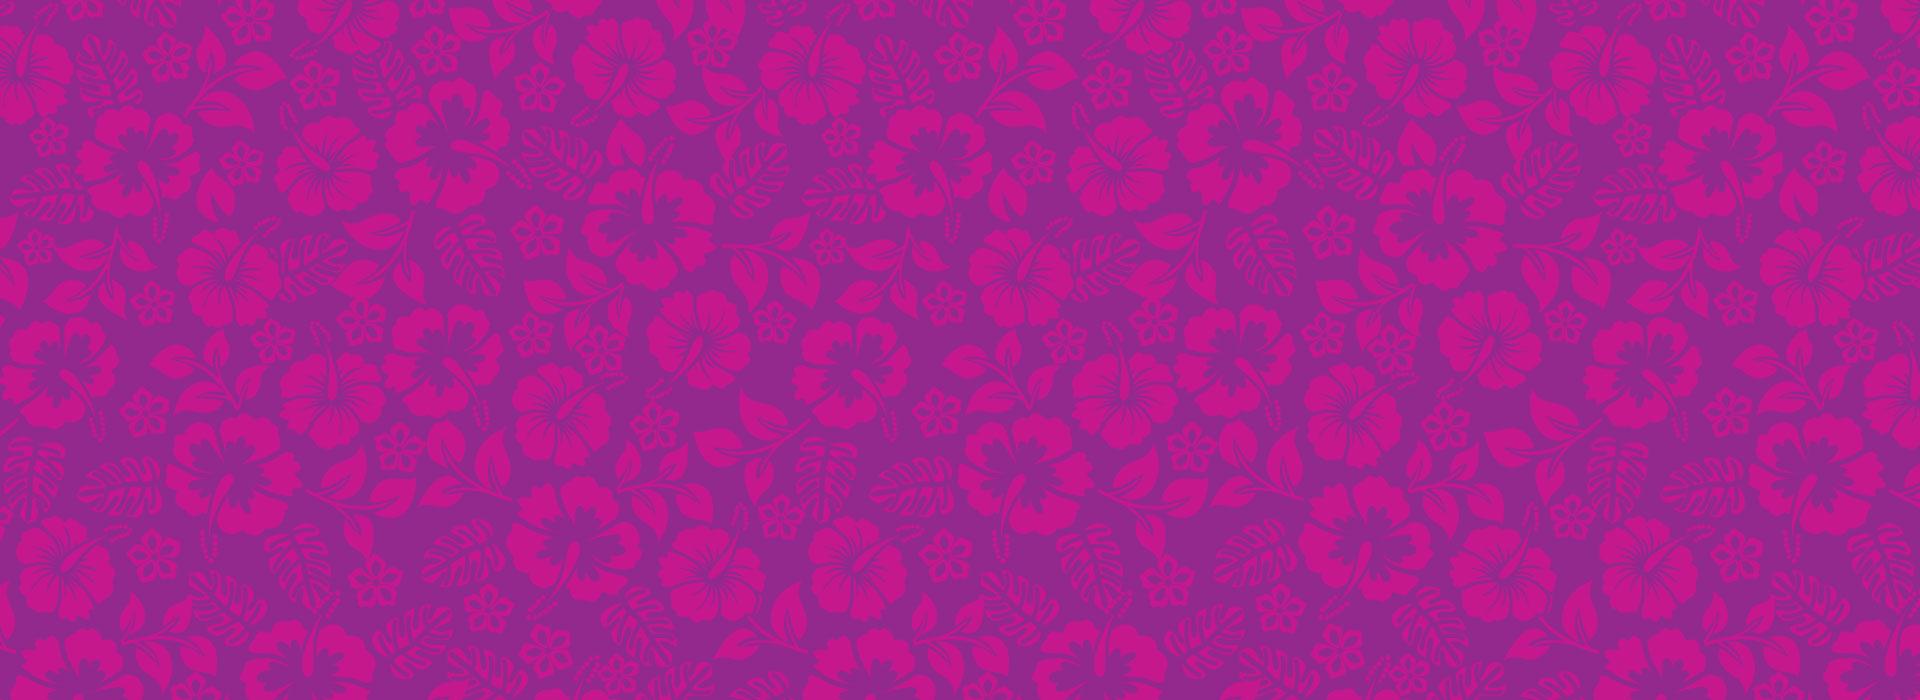 purple background with hibiscus flowers